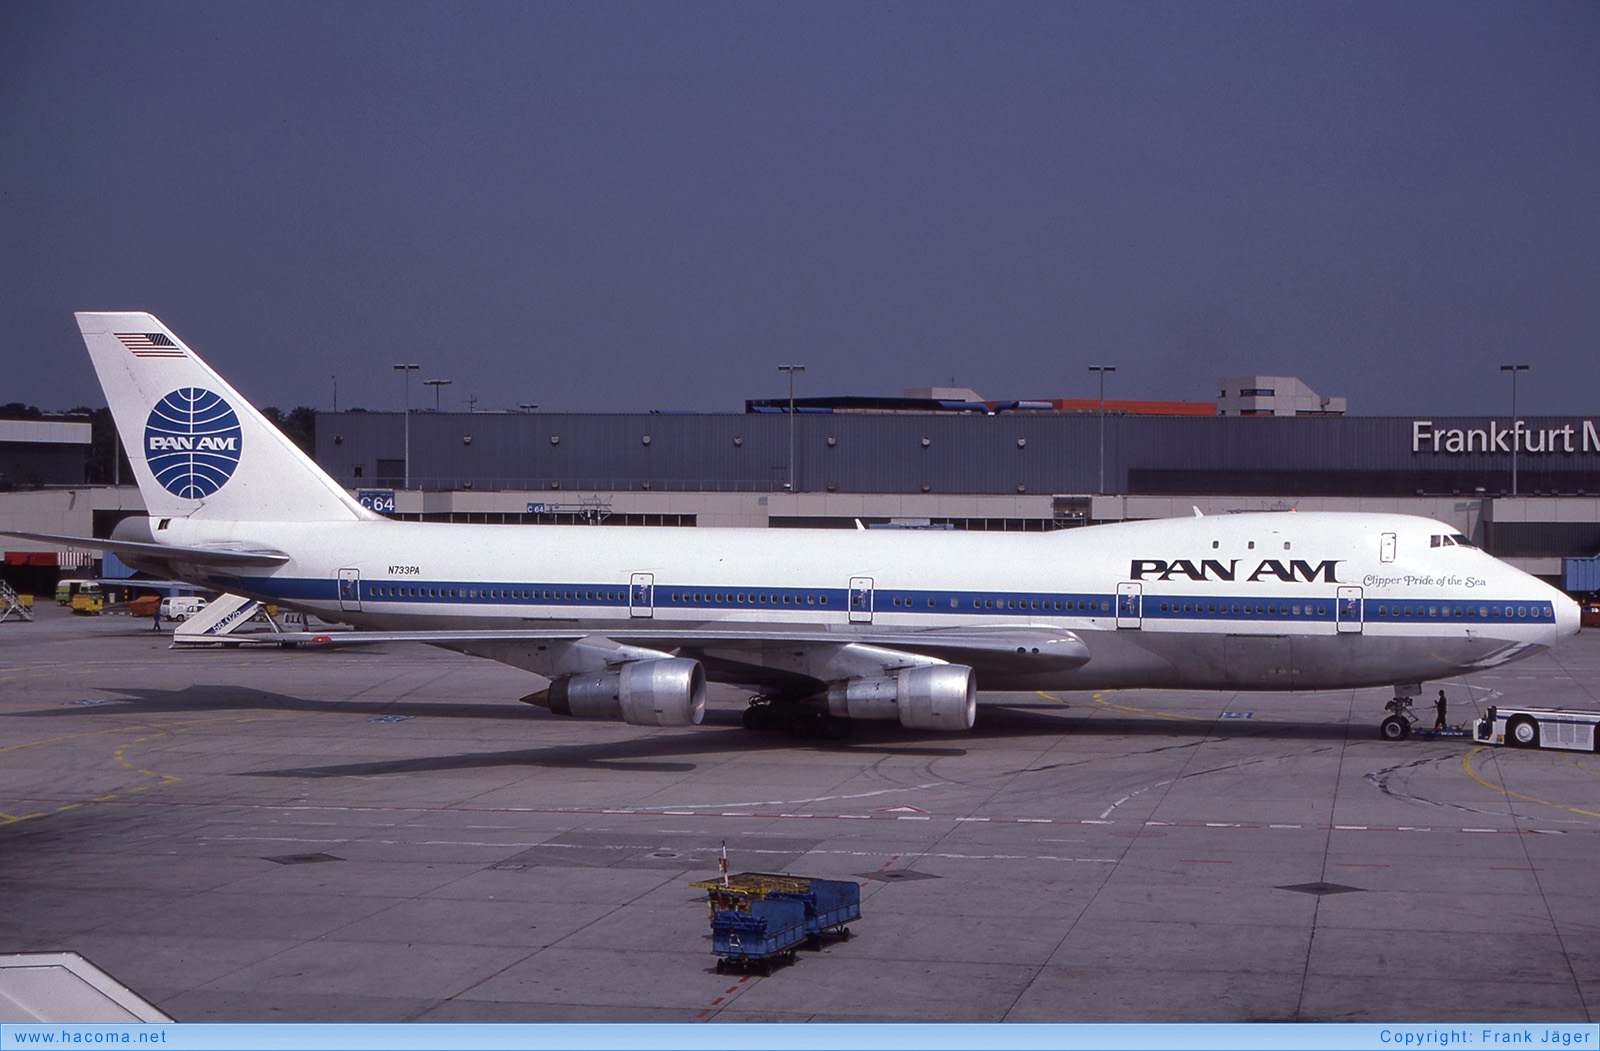 Photo of N733PA - Pan Am Clipper Young America / Constitution / Washington / Pride of the Sea / Air Express / Moscow Express - Frankfurt International Airport - Aug 19, 1984